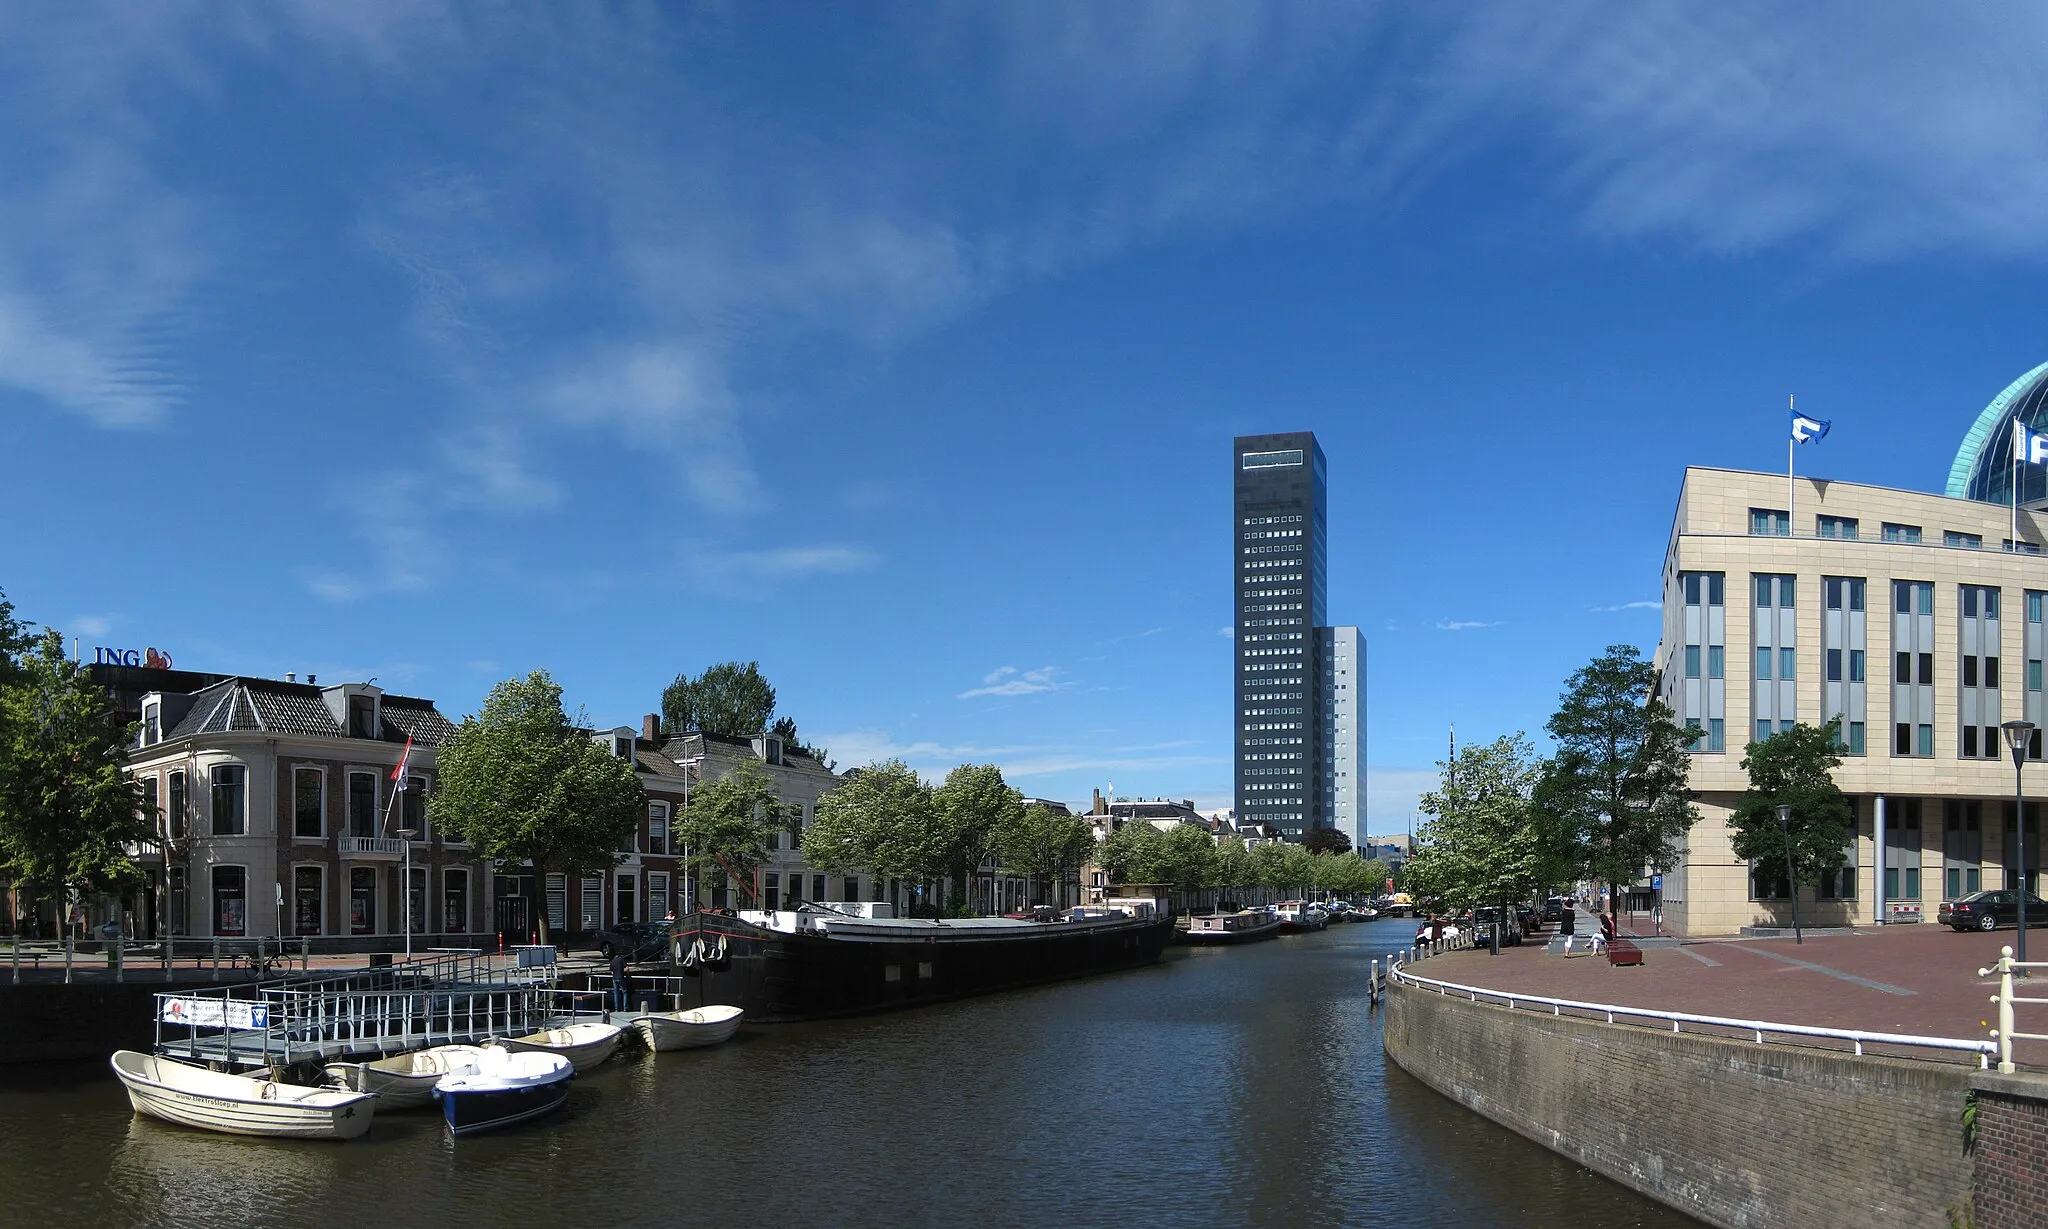 Photo showing: The Willemskade in Leeuwarden, the capital of the Dutch province of Fryslân.